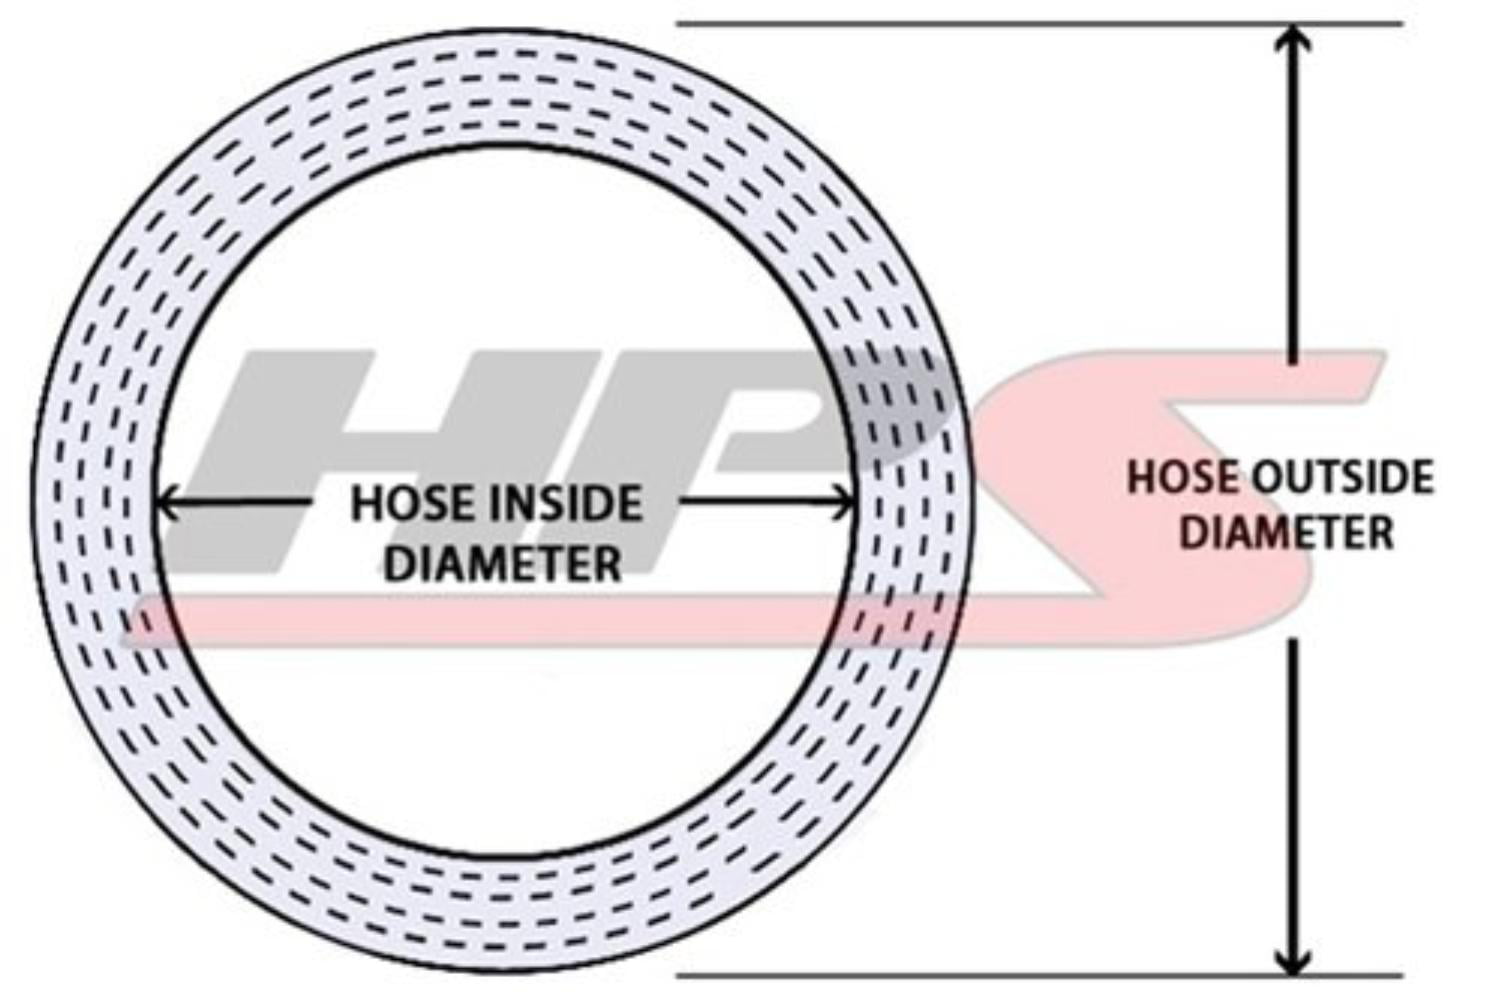 HPS HTHH-100-BLK Silicone High Temperature Reinforced Heater Hose 200 PSI Maximum Pressure,1 Length 1 ID Black 1' Length 1 ID 